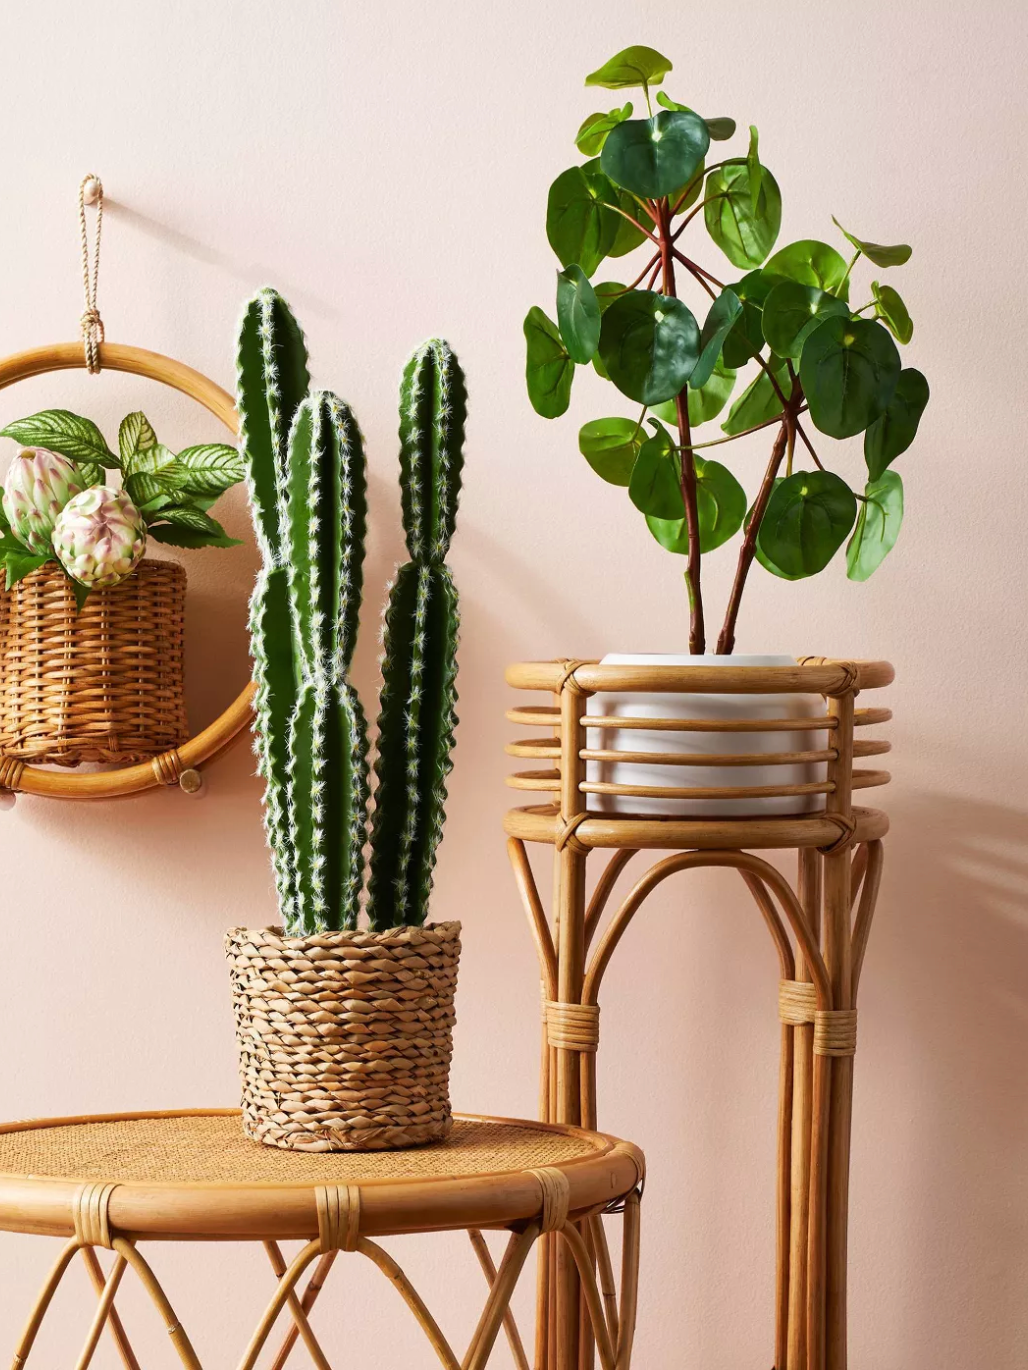 The Stars of Target’s Latest Opalhouse Collection Are the Fake Plants